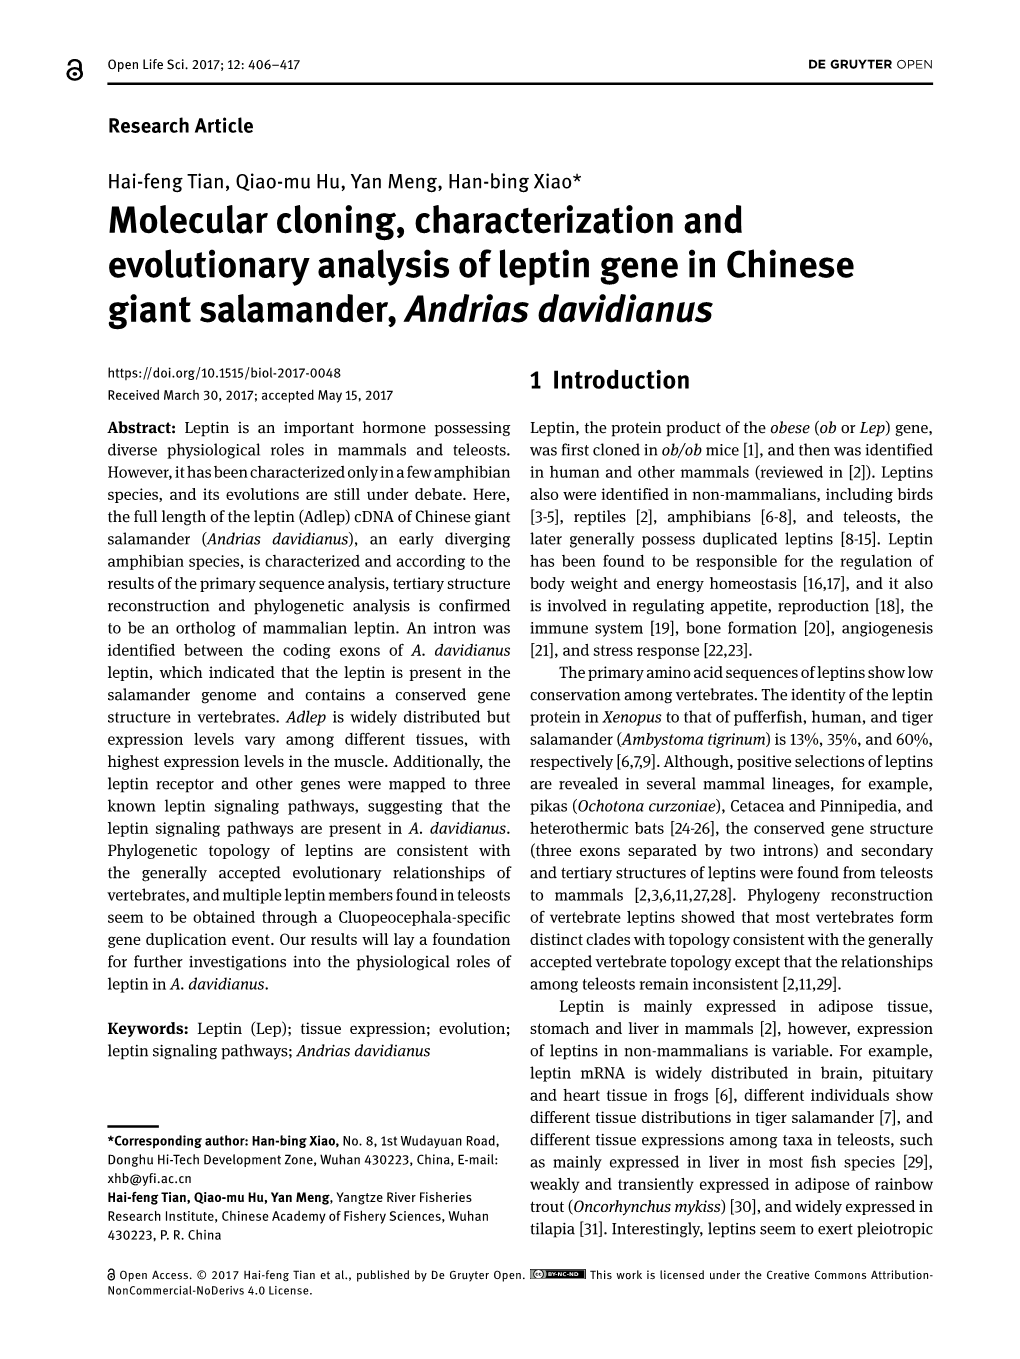 Molecular Cloning, Characterization and Evolutionary Analysis of Leptin